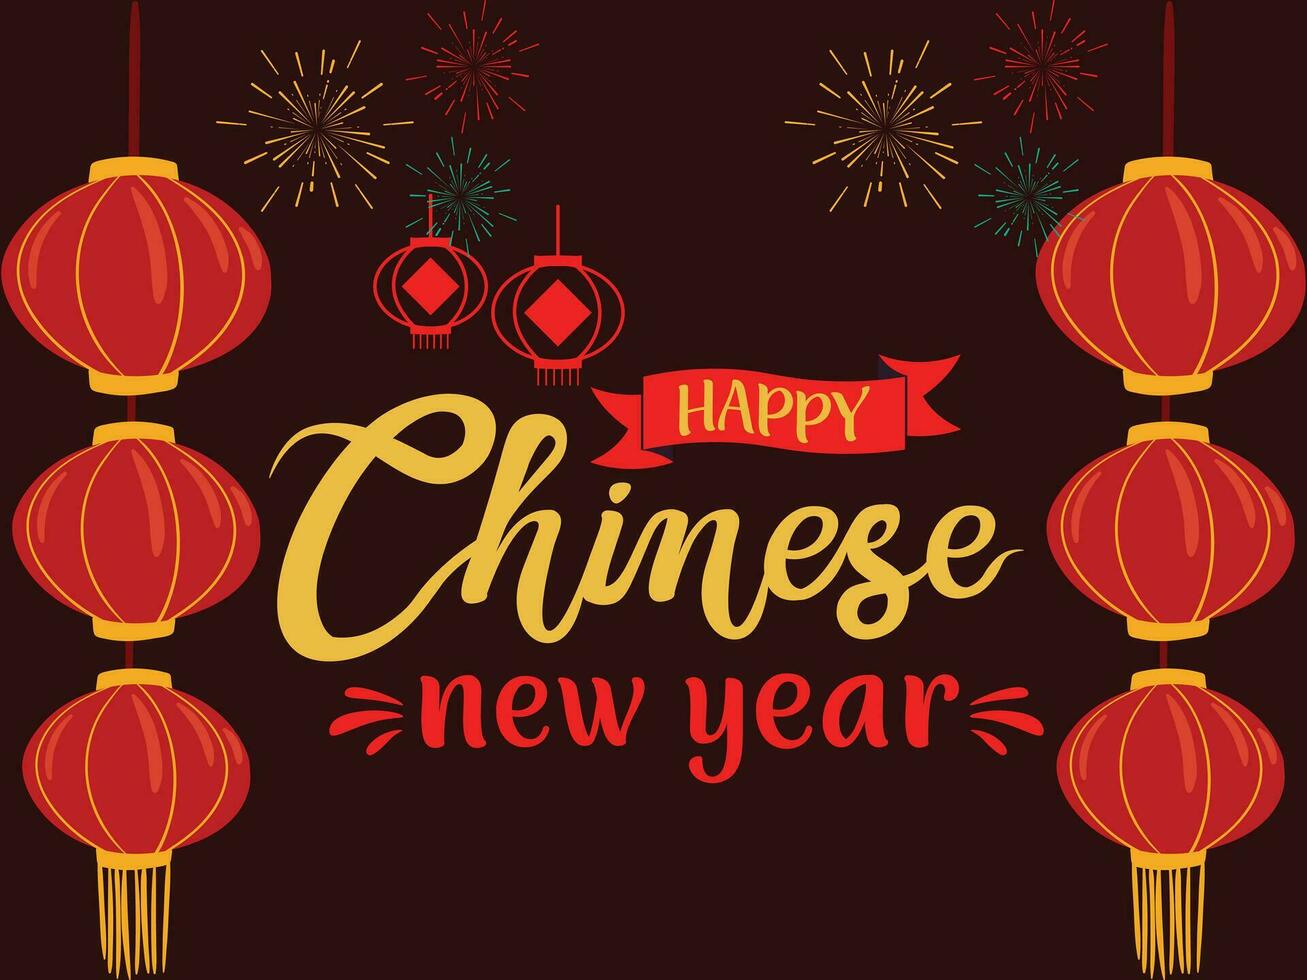 Chinese New Year card vector